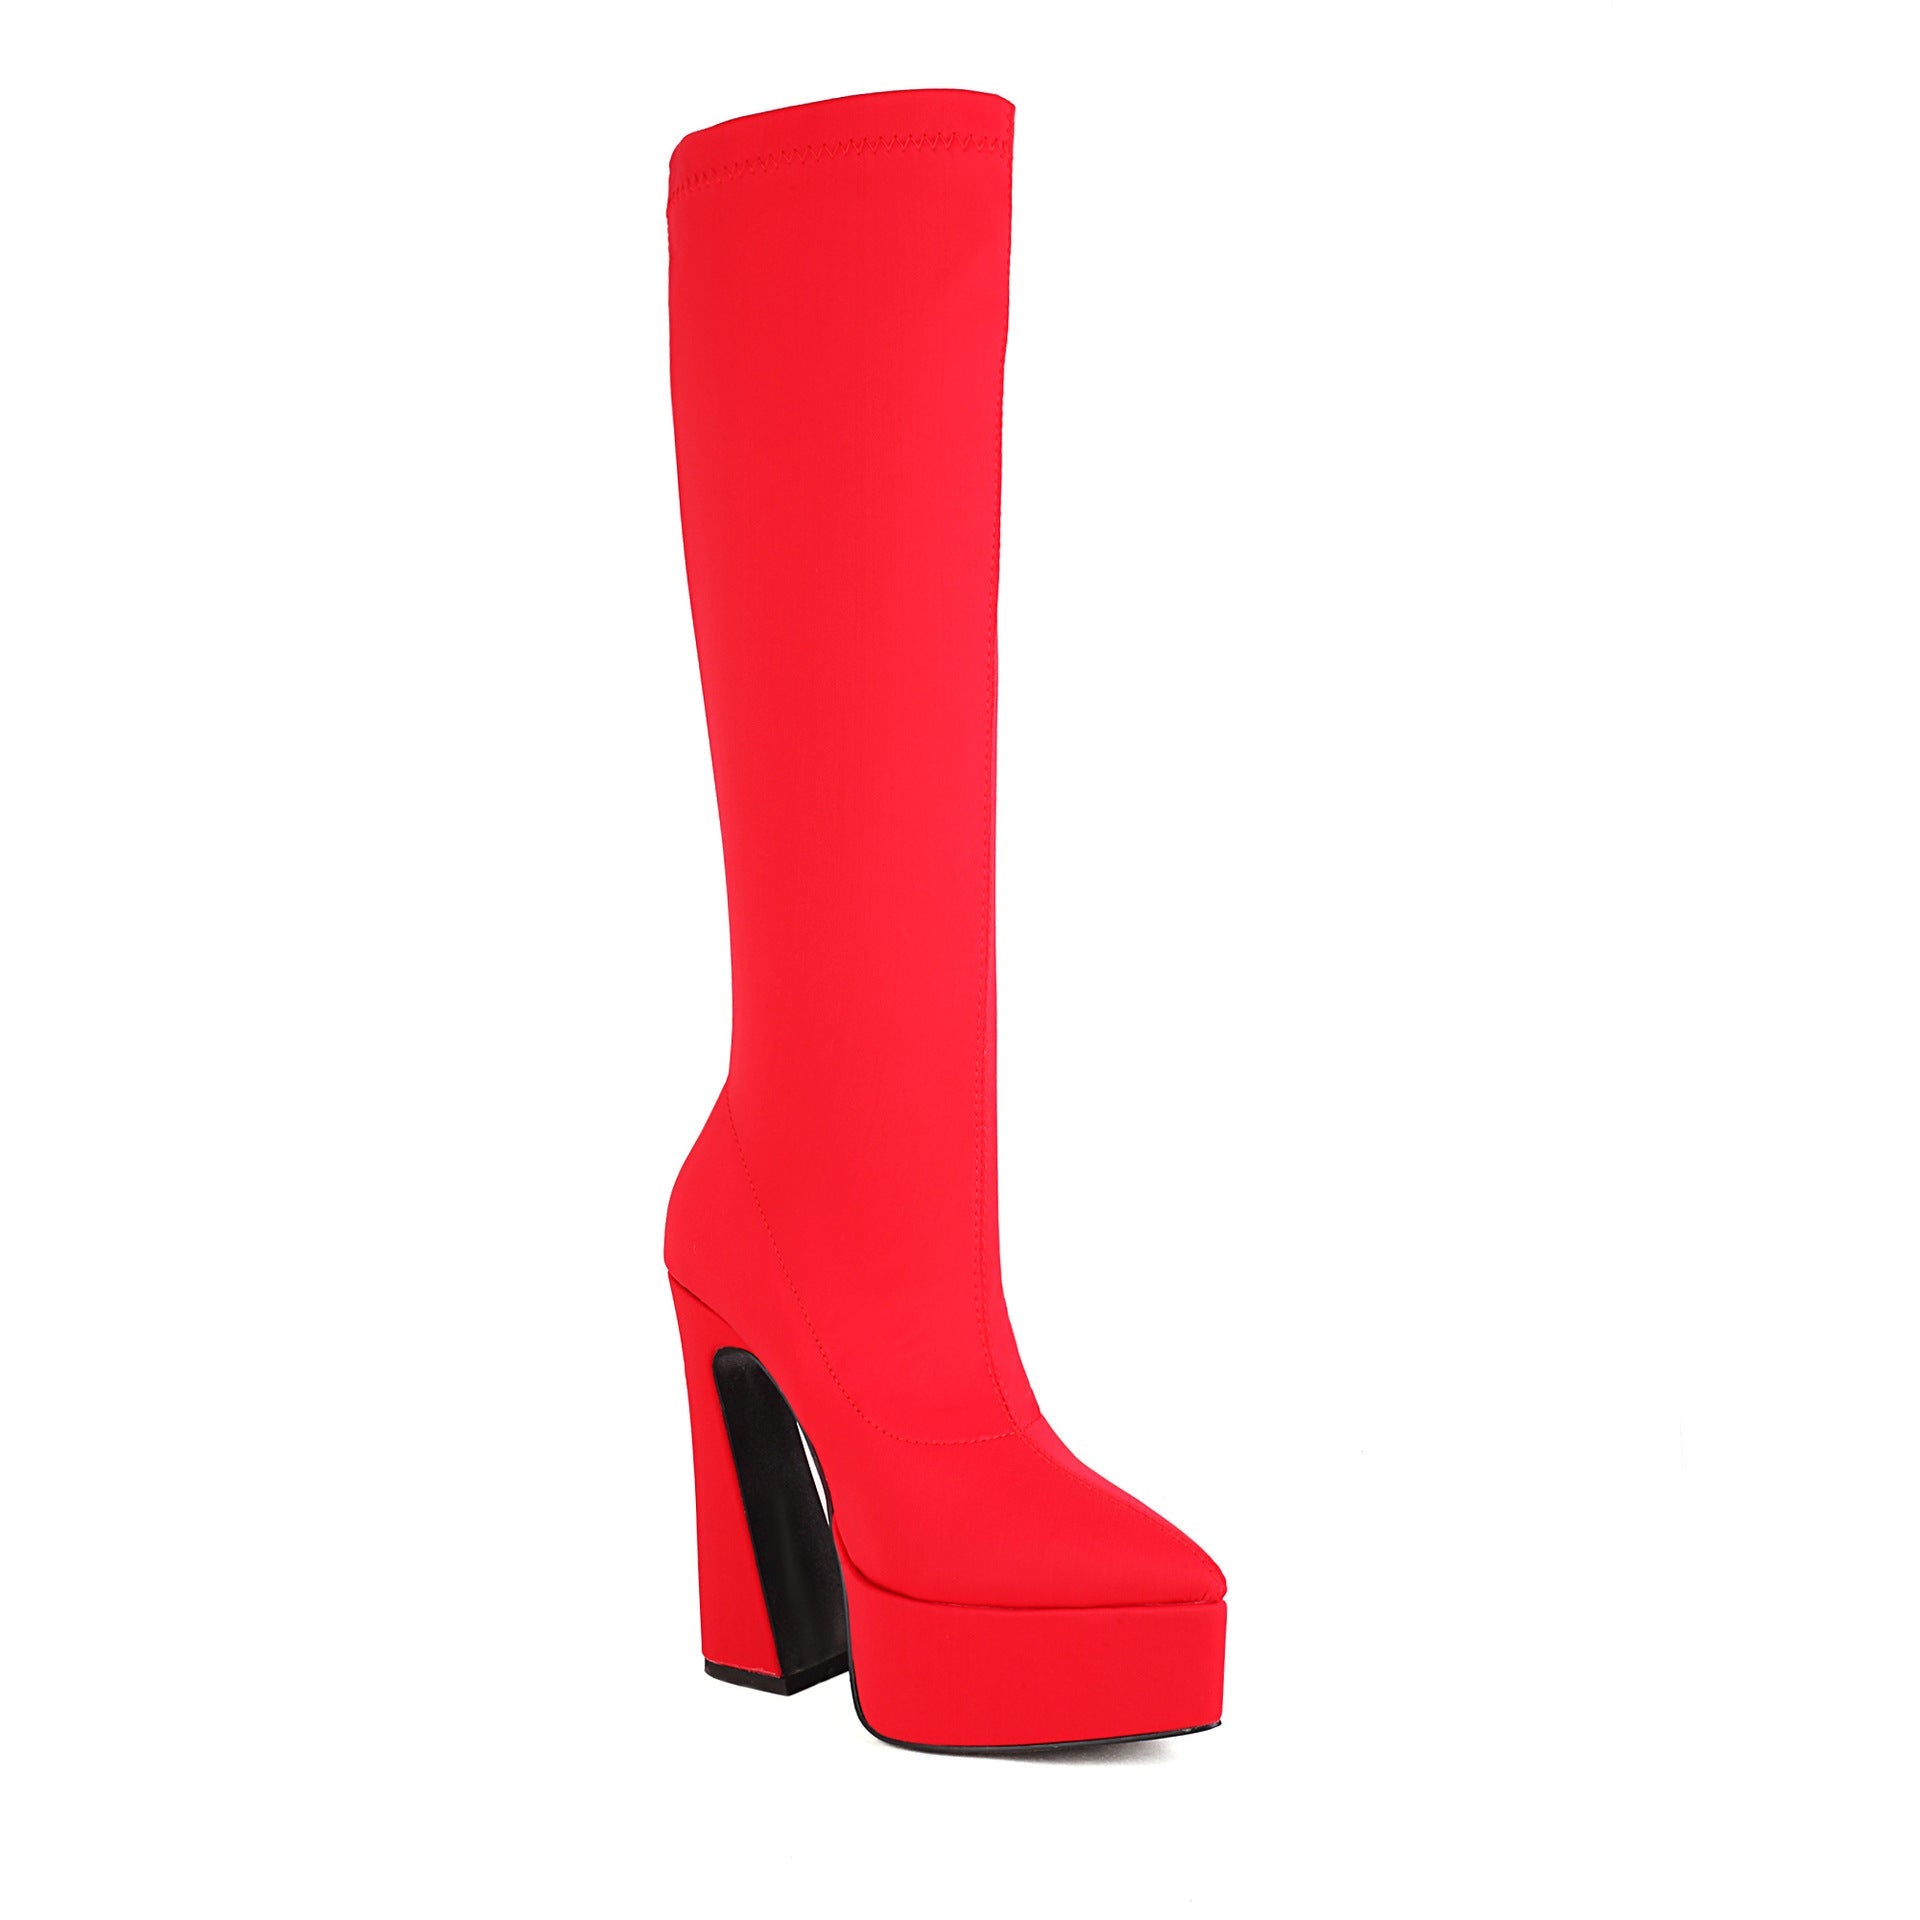 Candy Pointed Toe Super High Heel Boots